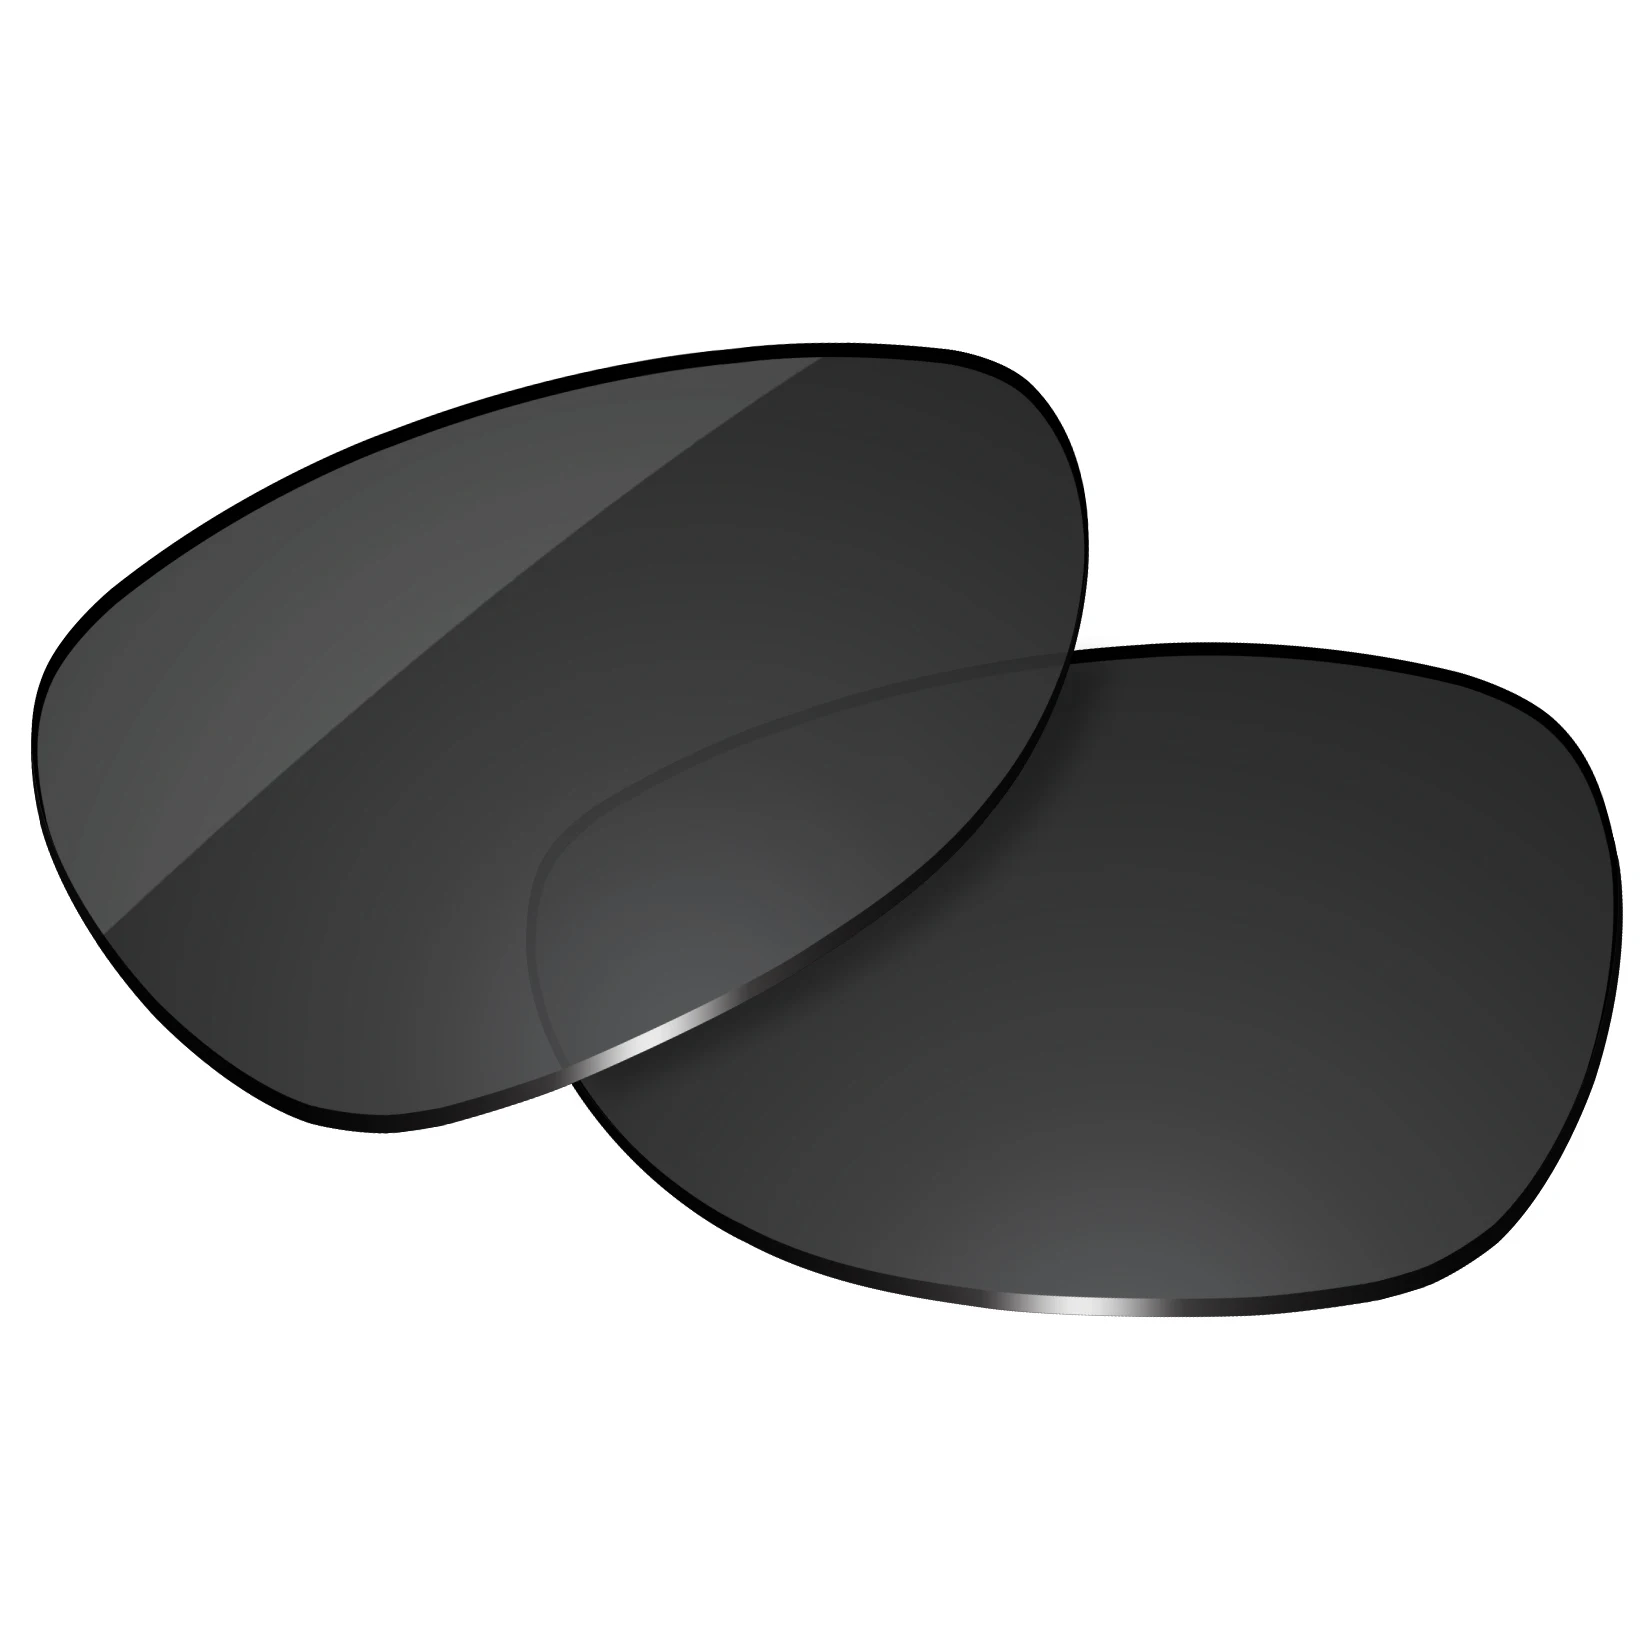 OOWLIT Polarized Replacement Lenses for-RayBan RB8301-59 Sunglasses (Lens Only)